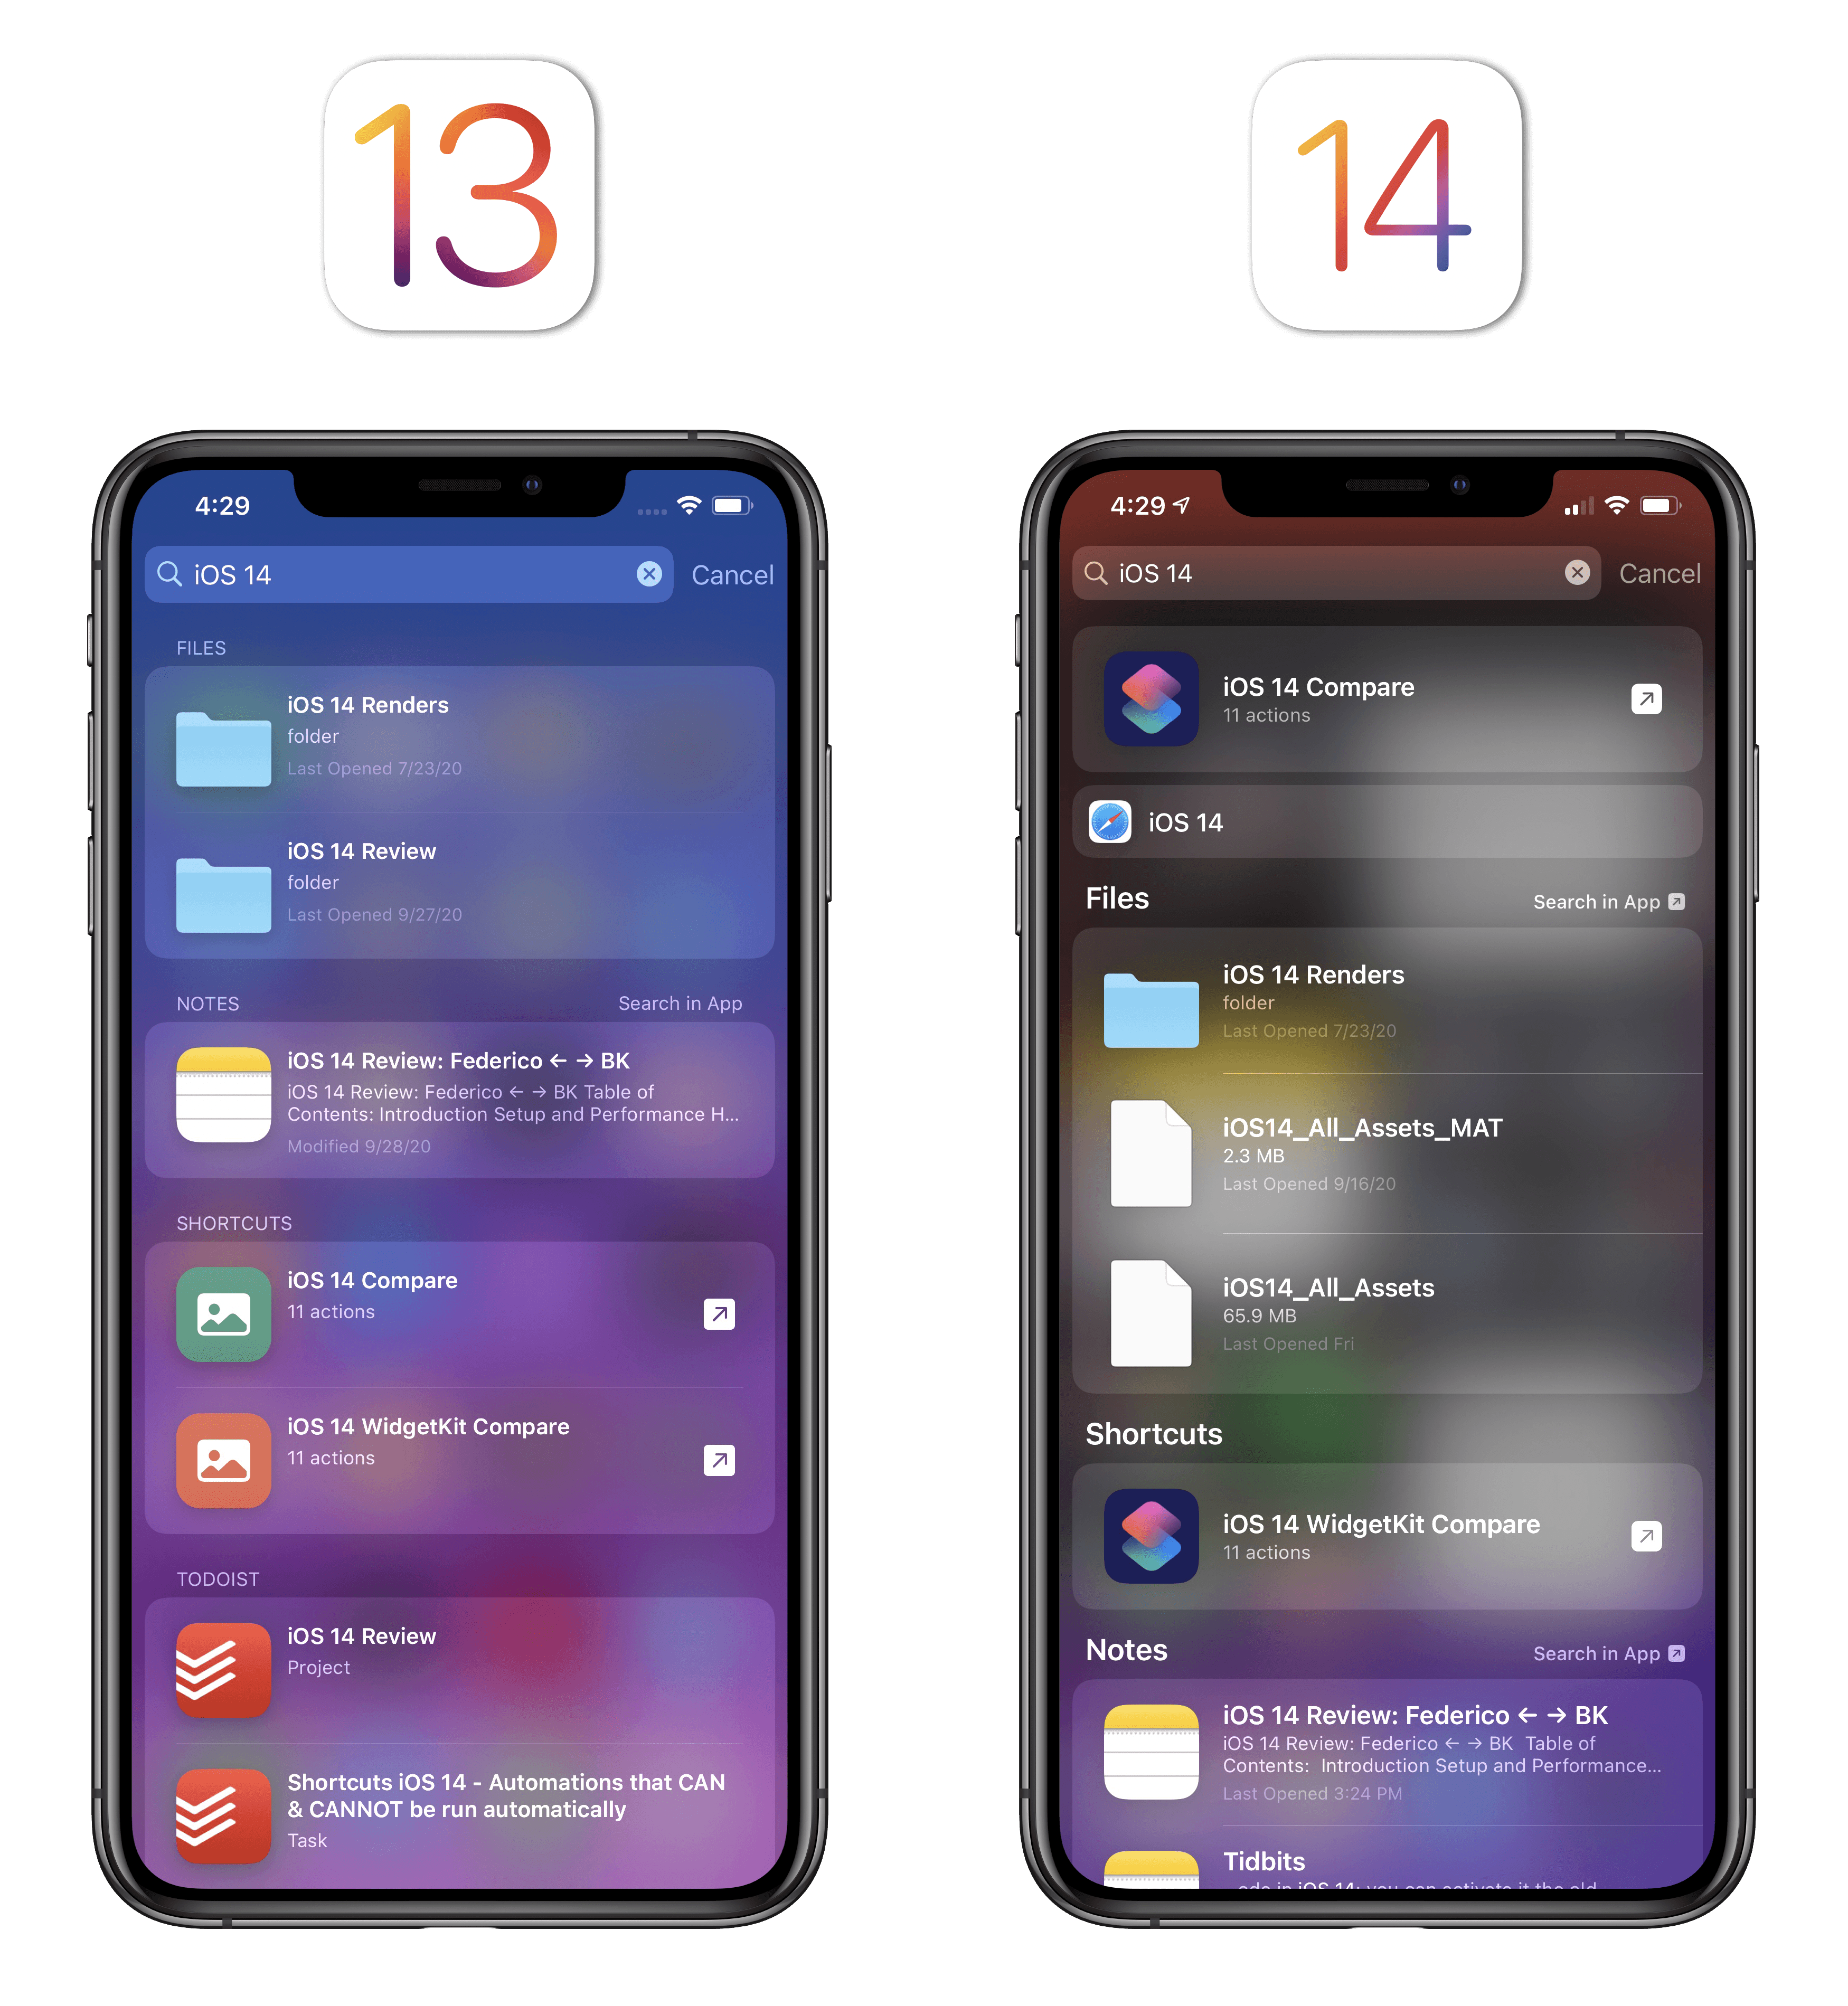 iOS 14's Search includes smarter Top Hits and integrates web search suggestions.